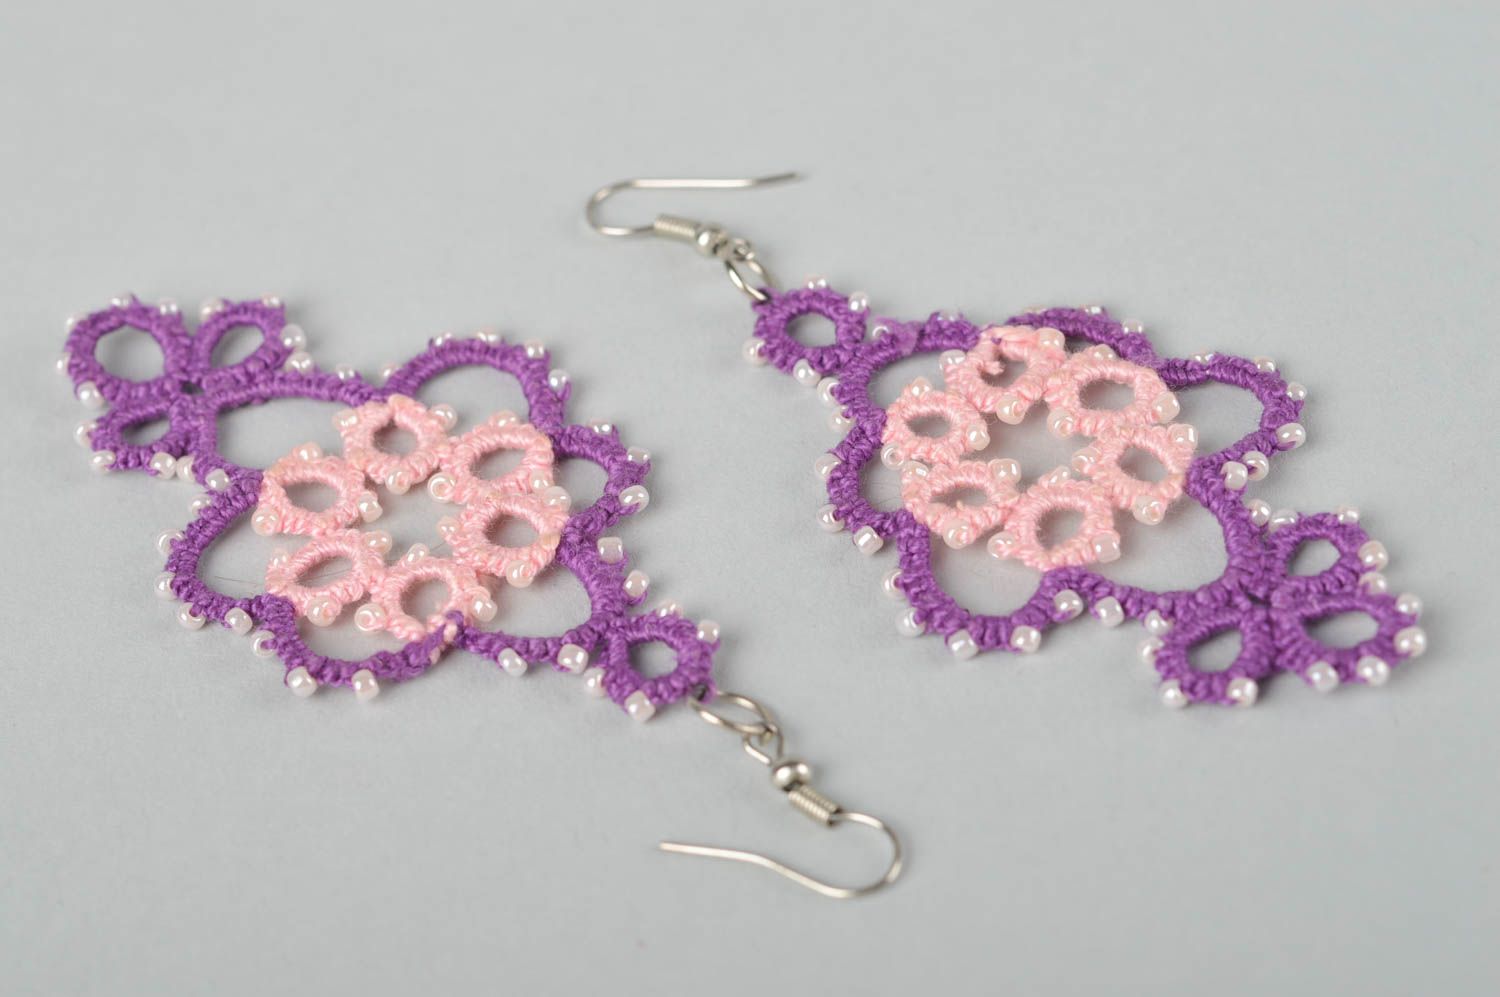 Homemade jewelry lacy earrings designer accessories earrings for women photo 5